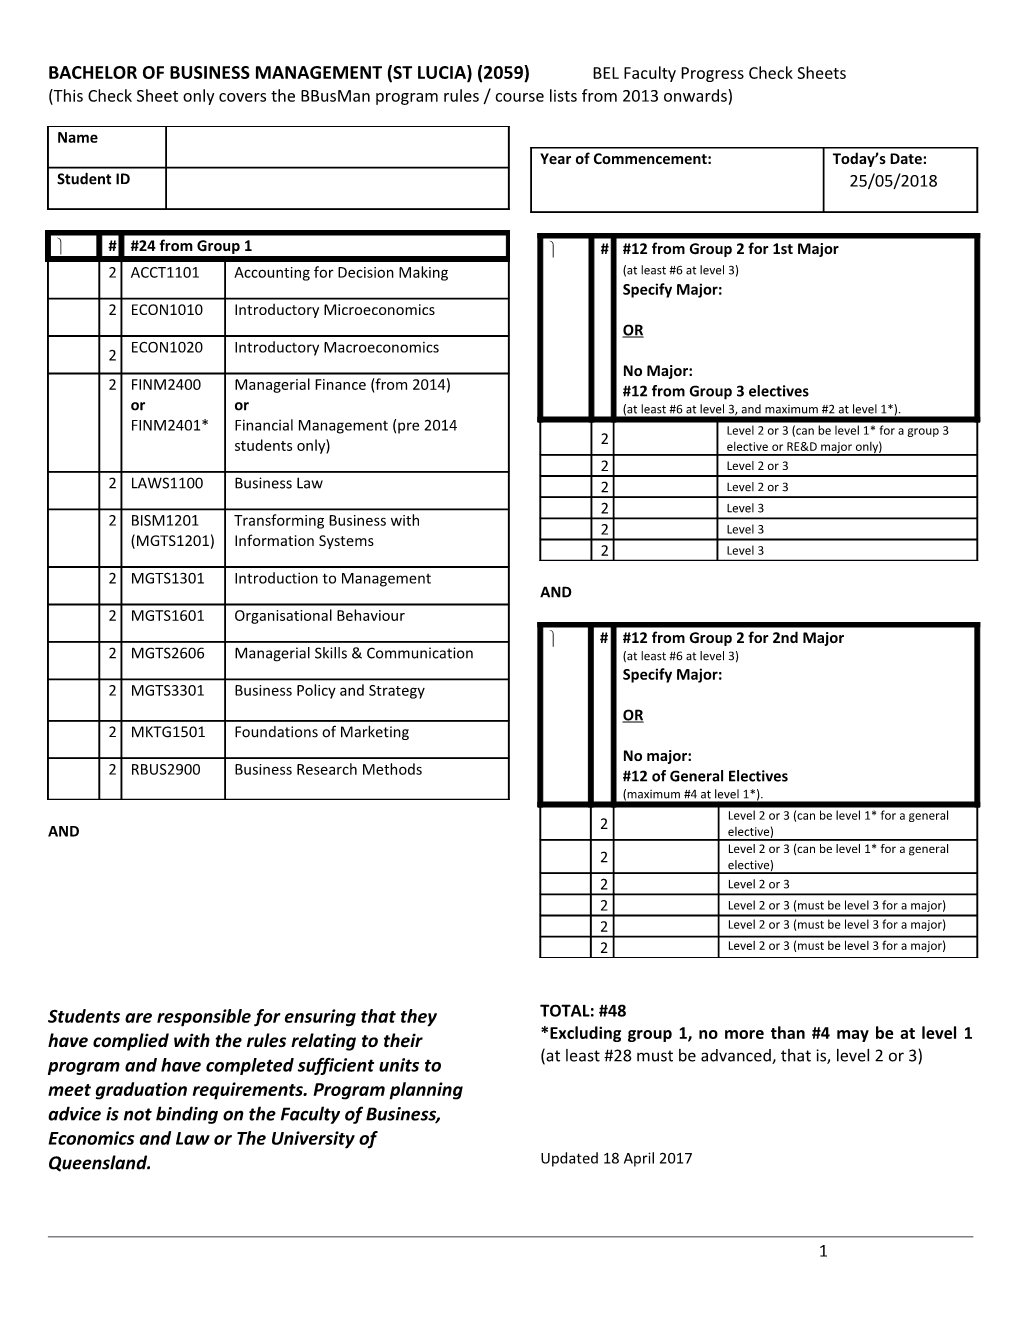 BACHELOR of BUSINESS MANAGEMENT (ST LUCIA) (2059) BEL Faculty Progress Check Sheets